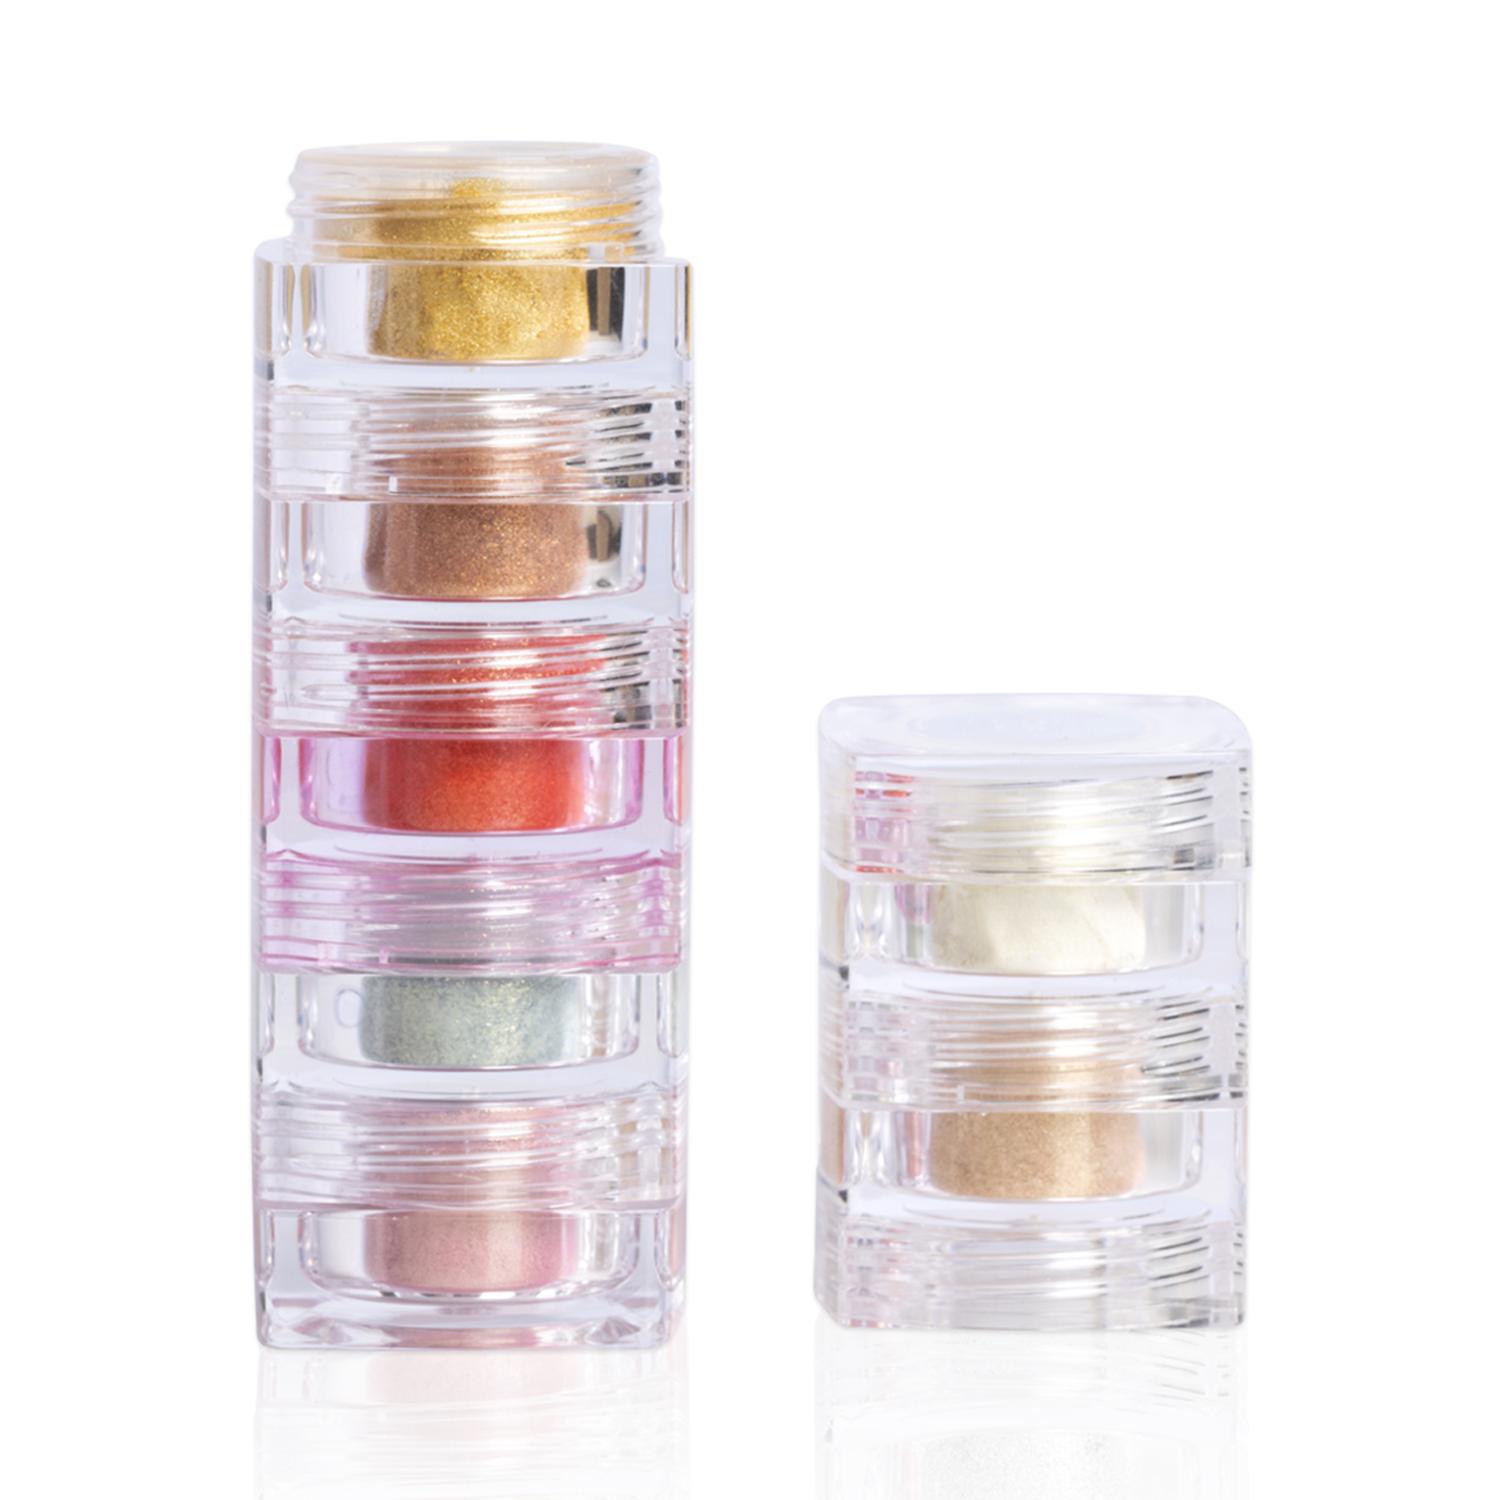 PAC | PAC 7-In-1 Pigment Tower - 02 Shade (2.5g)